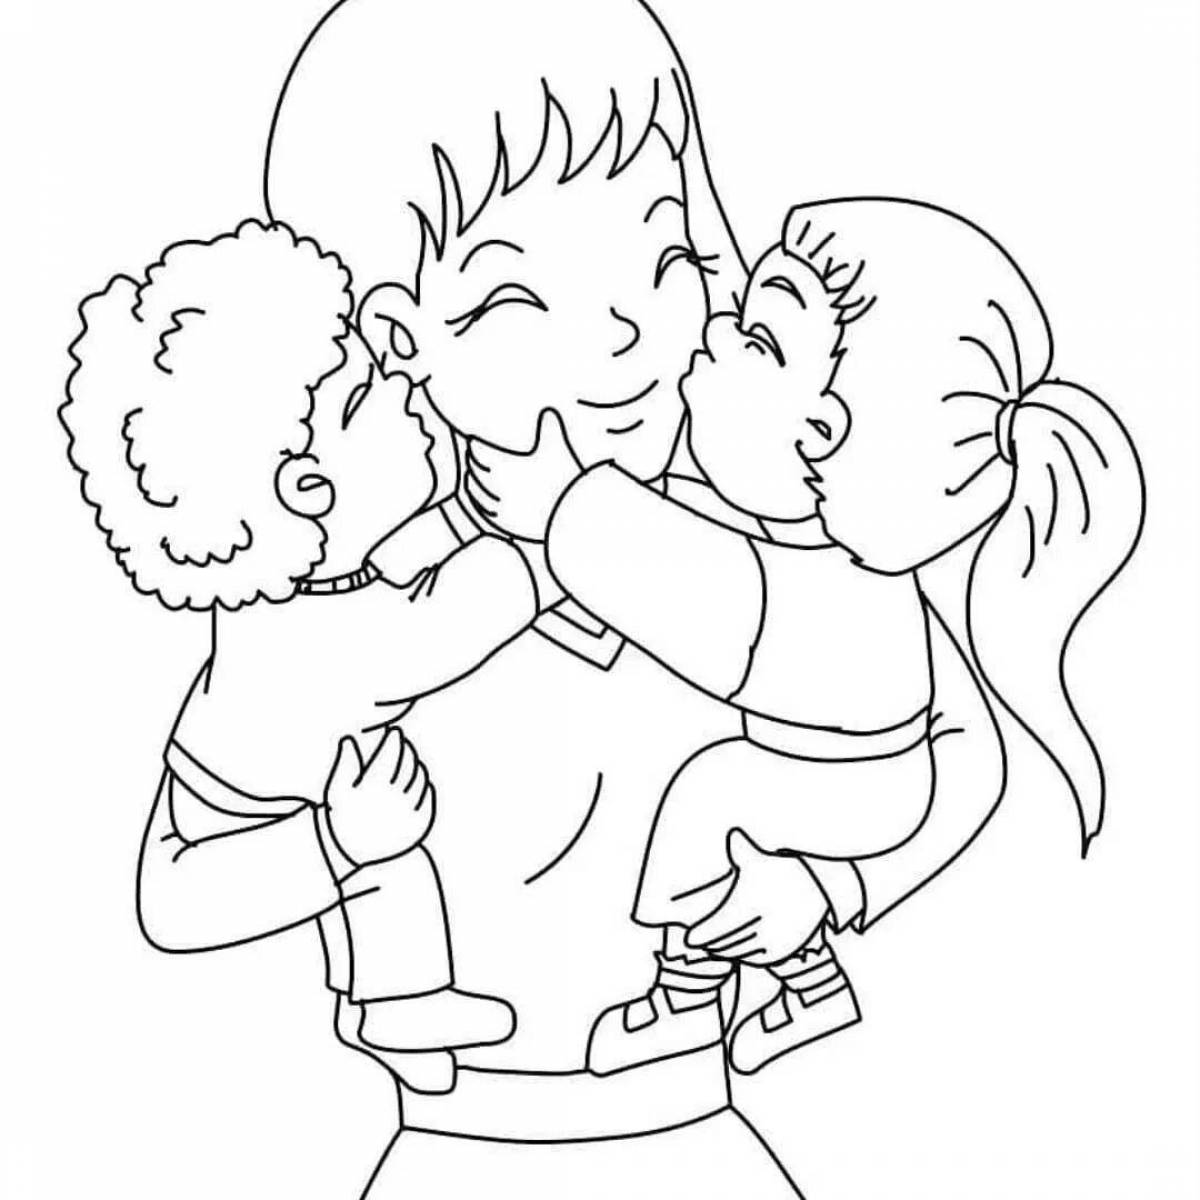 Coloring page happy hug day for kids